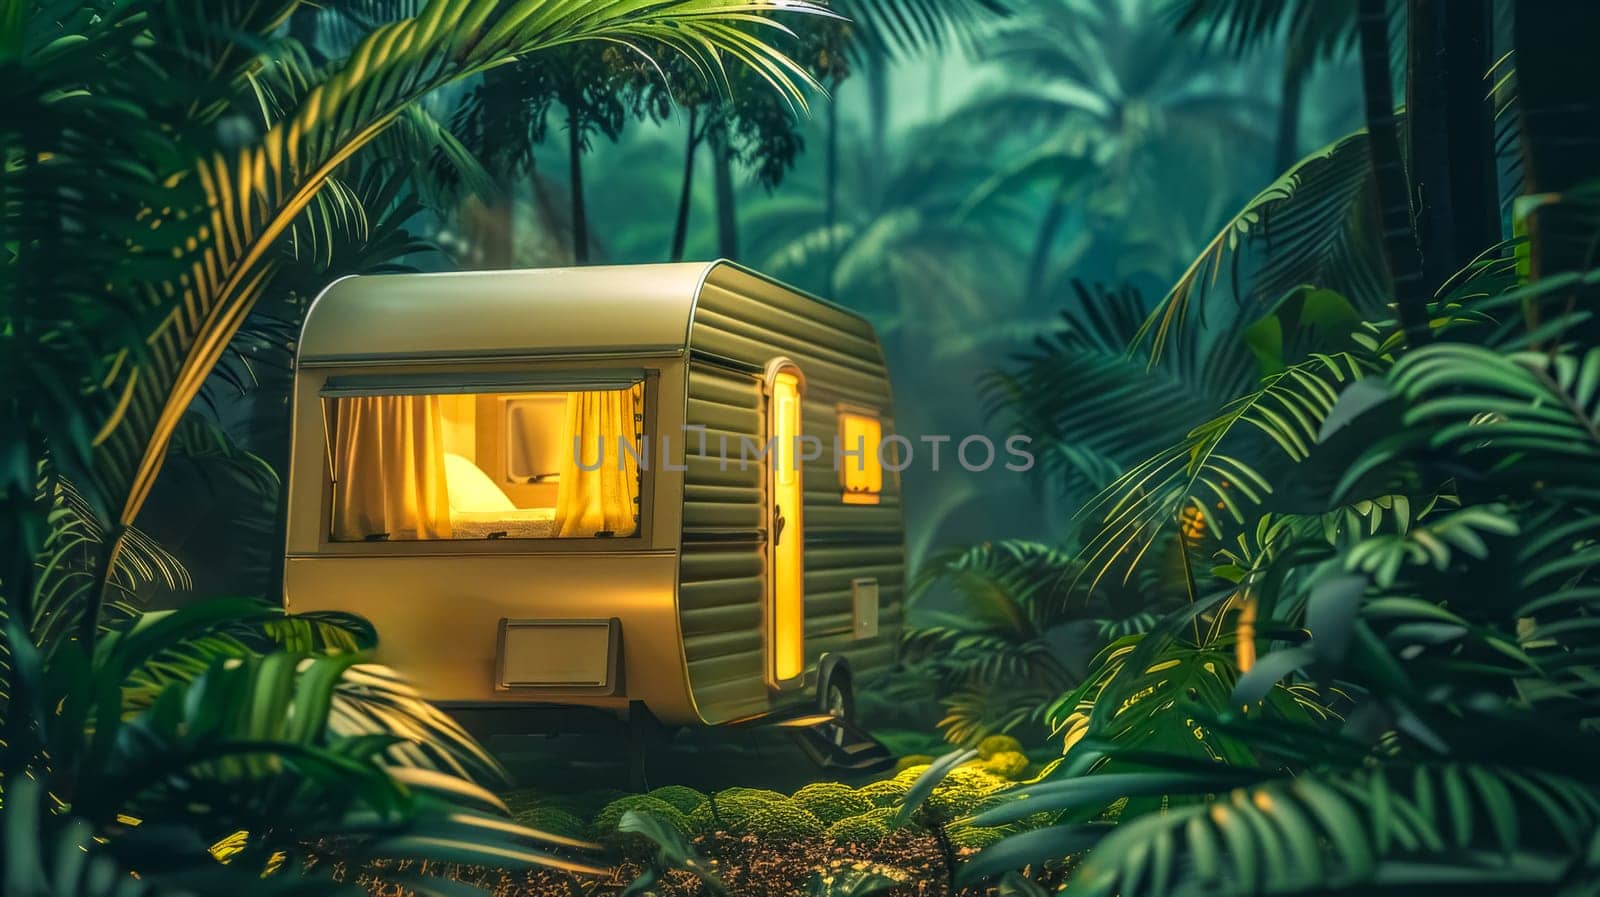 Cozy caravan in enchanted forest at twilight by Edophoto